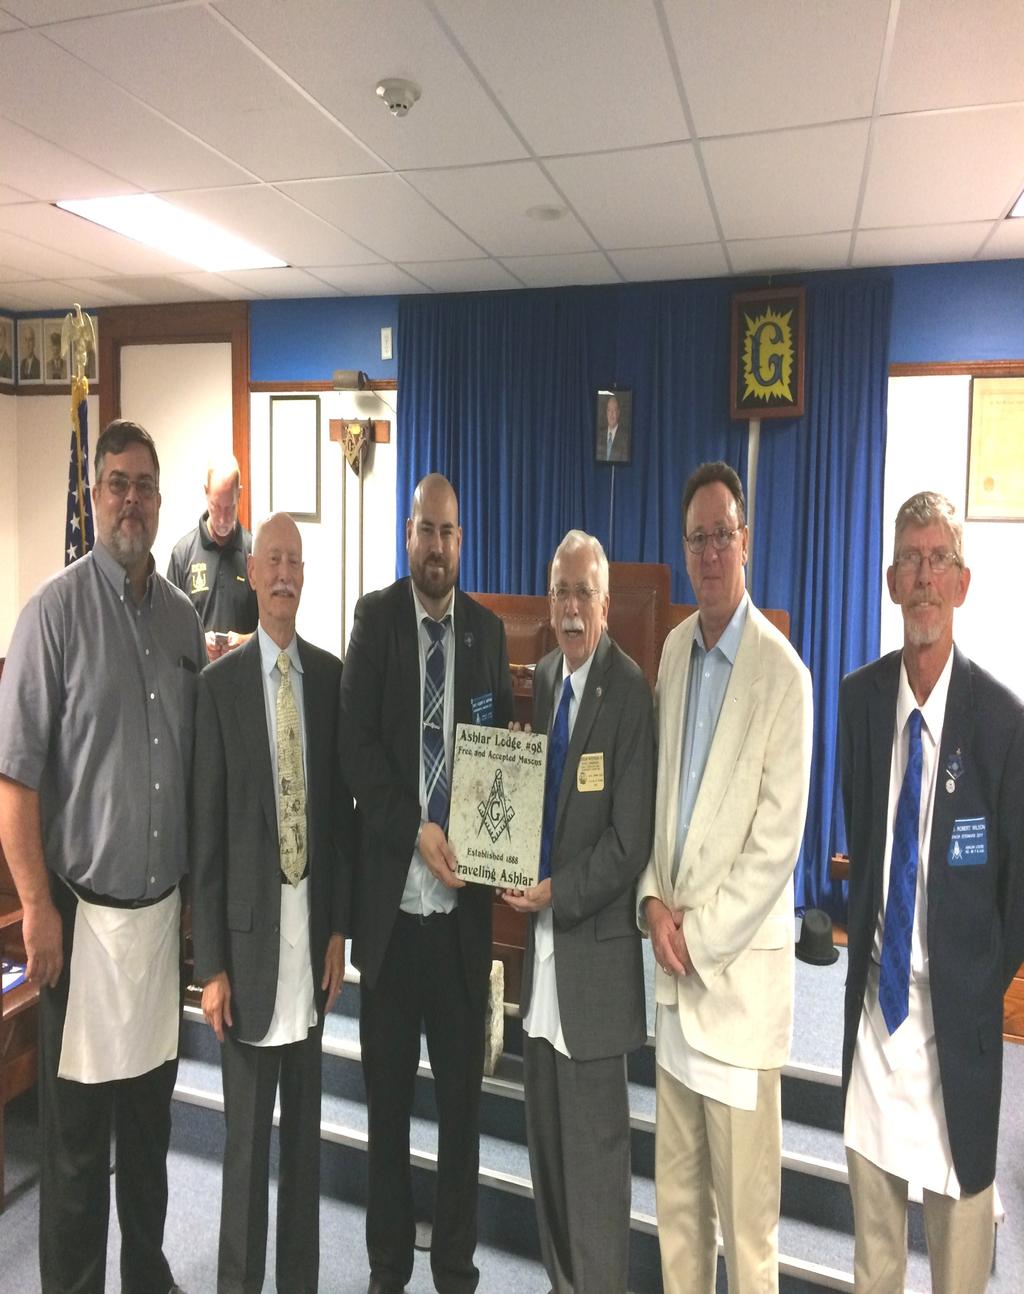 RETURN TO RIBAULT LODGE Brothers from Ashlar Lodge No. 98 returned to Ribault Lodge No. 272 in Jacksonville Beach on Tuesday, June 13, 2017, and reclaimed our Traveling Ashlar.